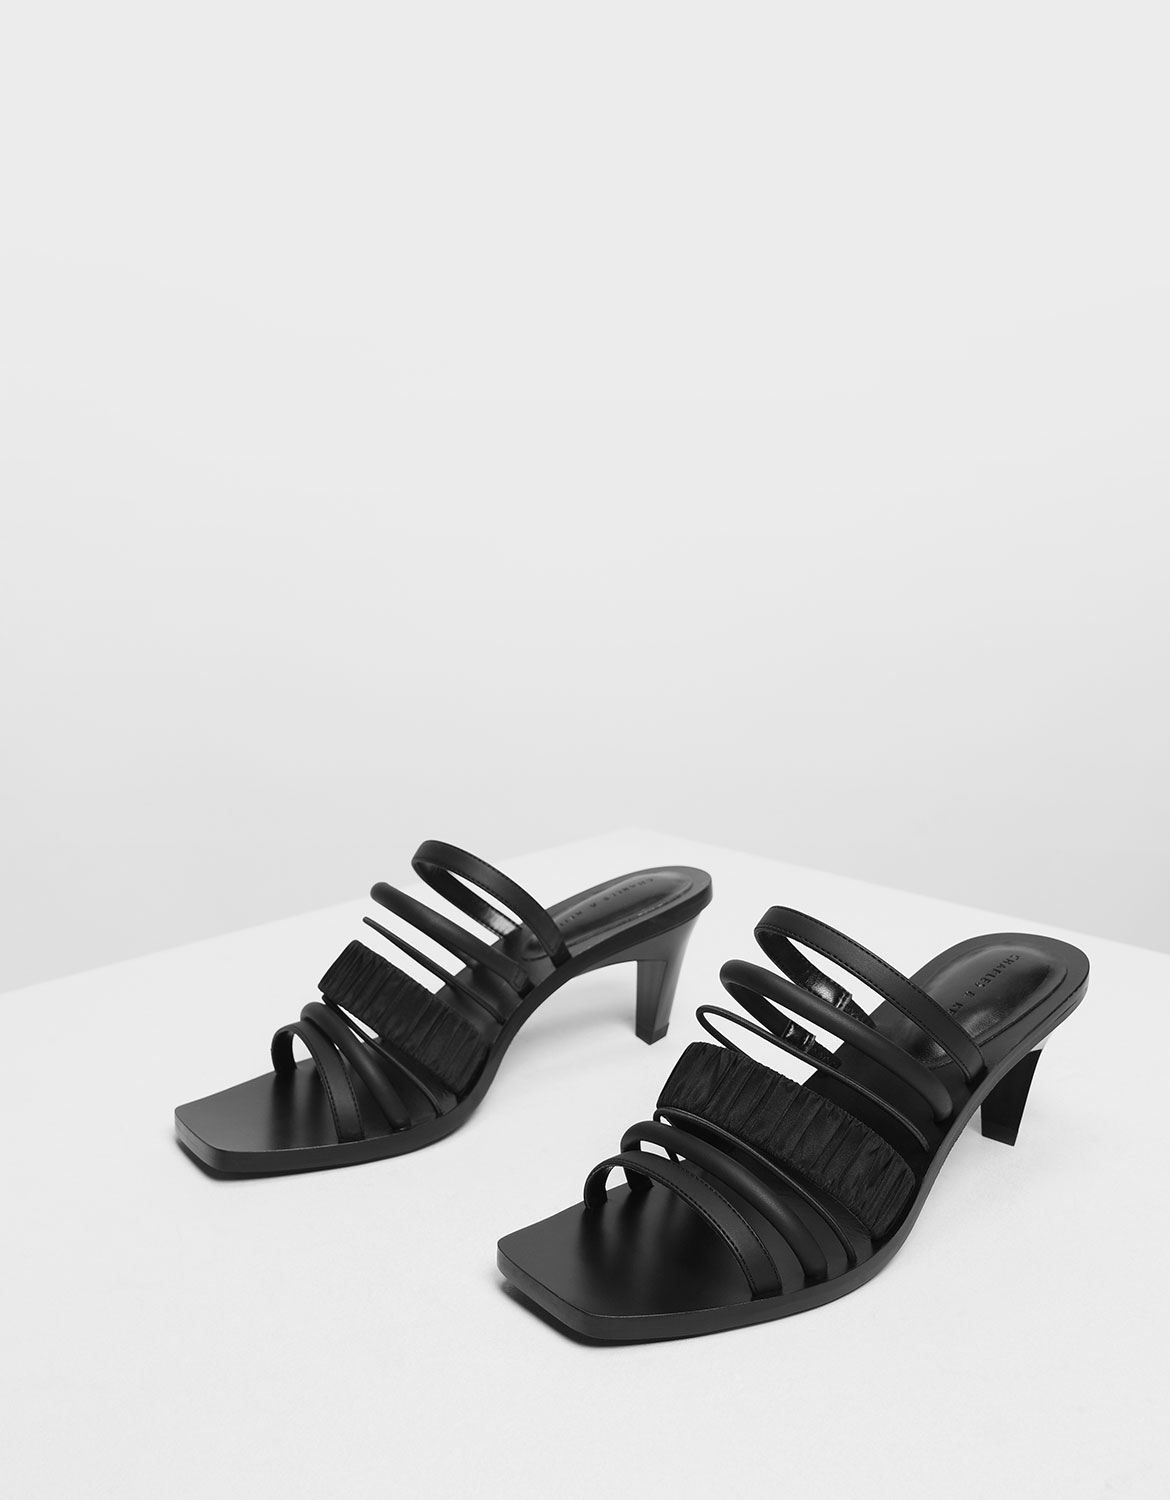 Women's Strappy Heels in black - CHARLES & KEITH